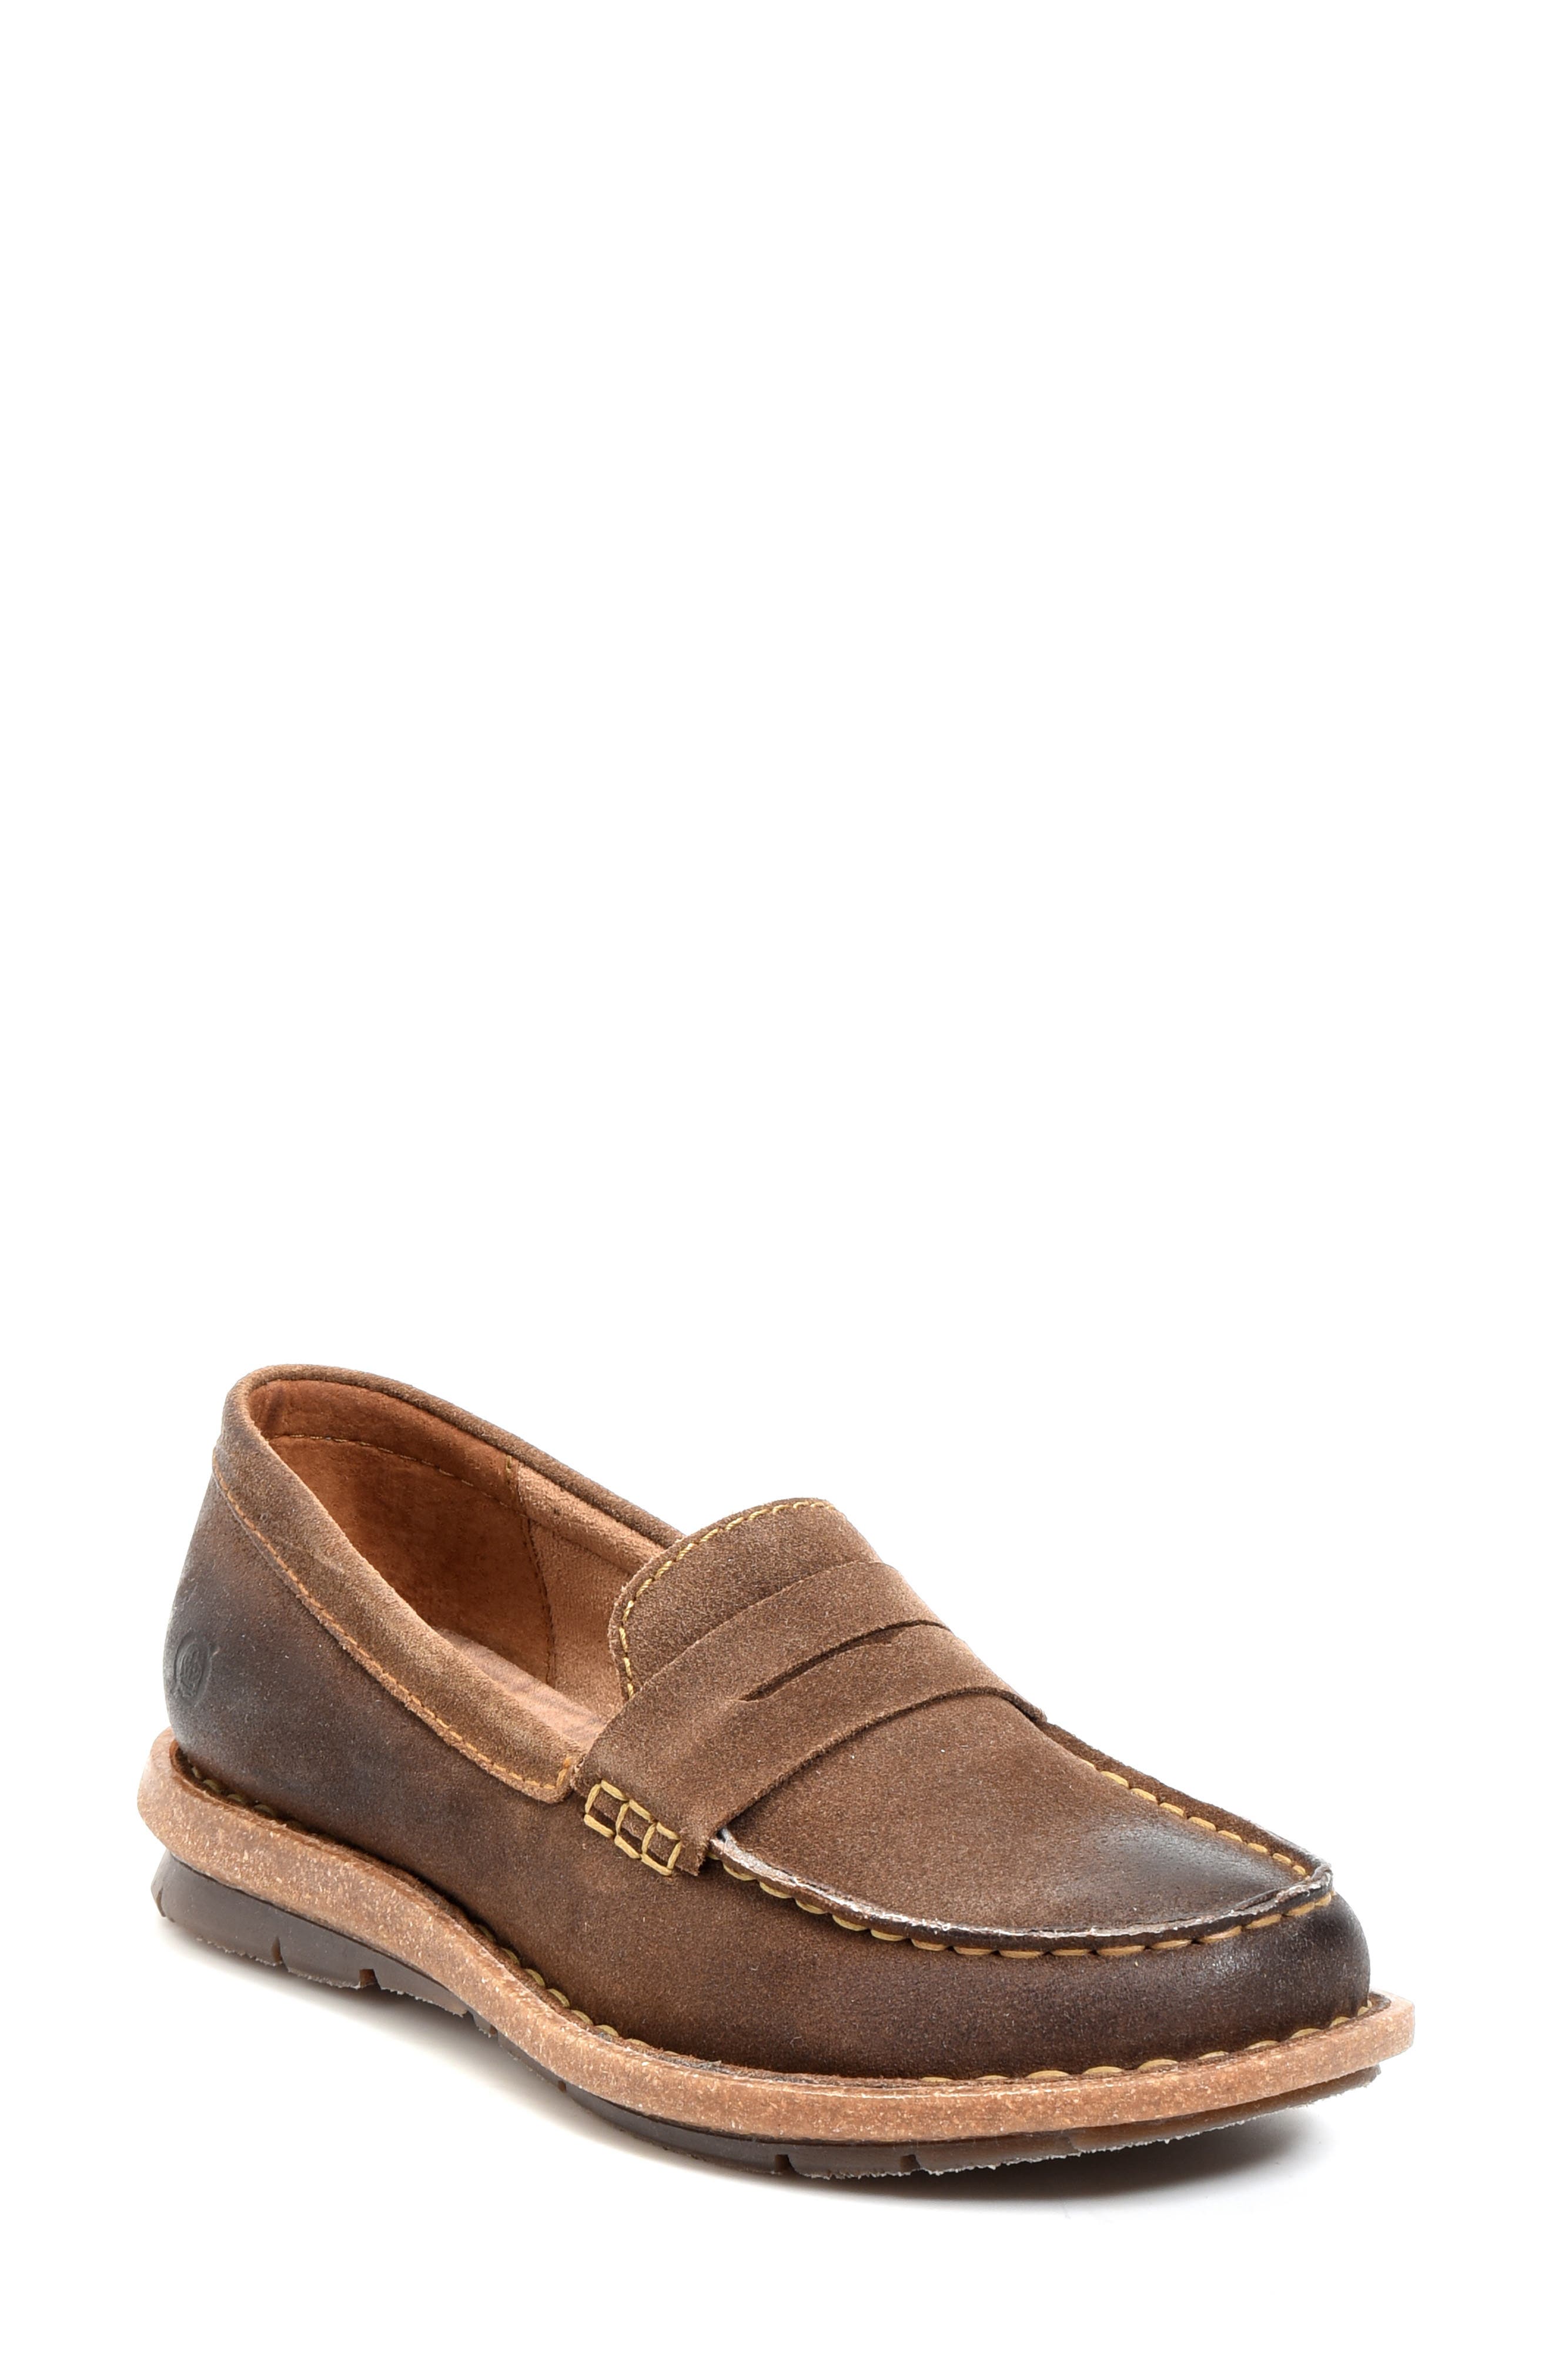 born loafers womens